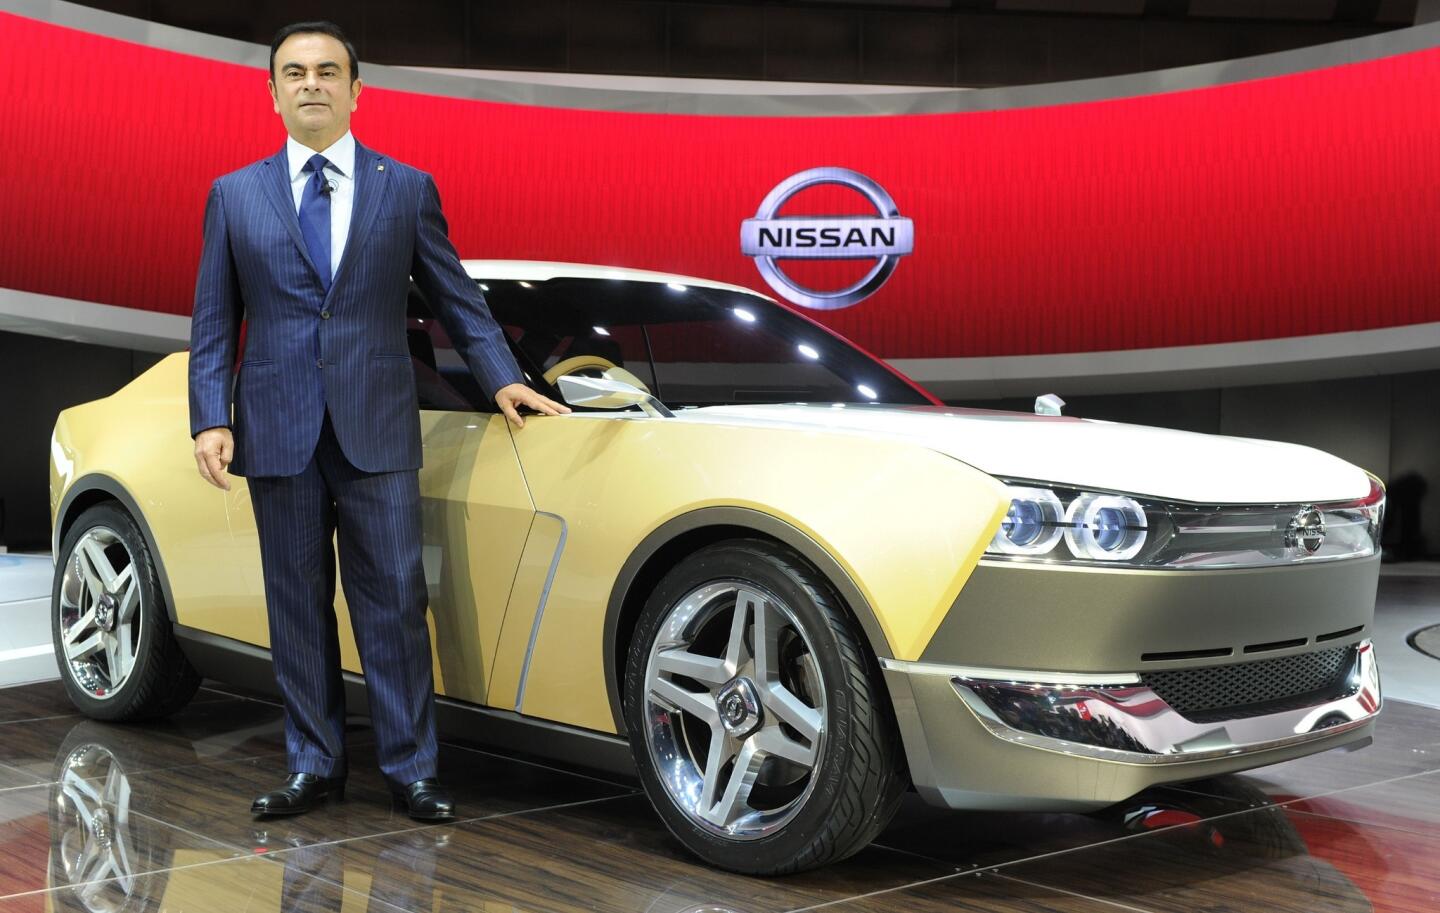 Nissan Motor President Carlos Ghosn poses in front of a IDx Freeflow at the company's booth at the Tokyo Motor Show 2013 in Tokyo on November 20, 2013. The biennial motor show, held from November 20 to December 1, features domestic makers of passenger cars, commercial vehicles and trucks alongside most of their European competitors. AFP PHOTO/Toru YAMANAKATORU YAMANAKA/AFP/Getty Images ** OUTS - ELSENT, FPG, TCN - OUTS * NM, PH, VA if sourced by CT, LA or MoD **